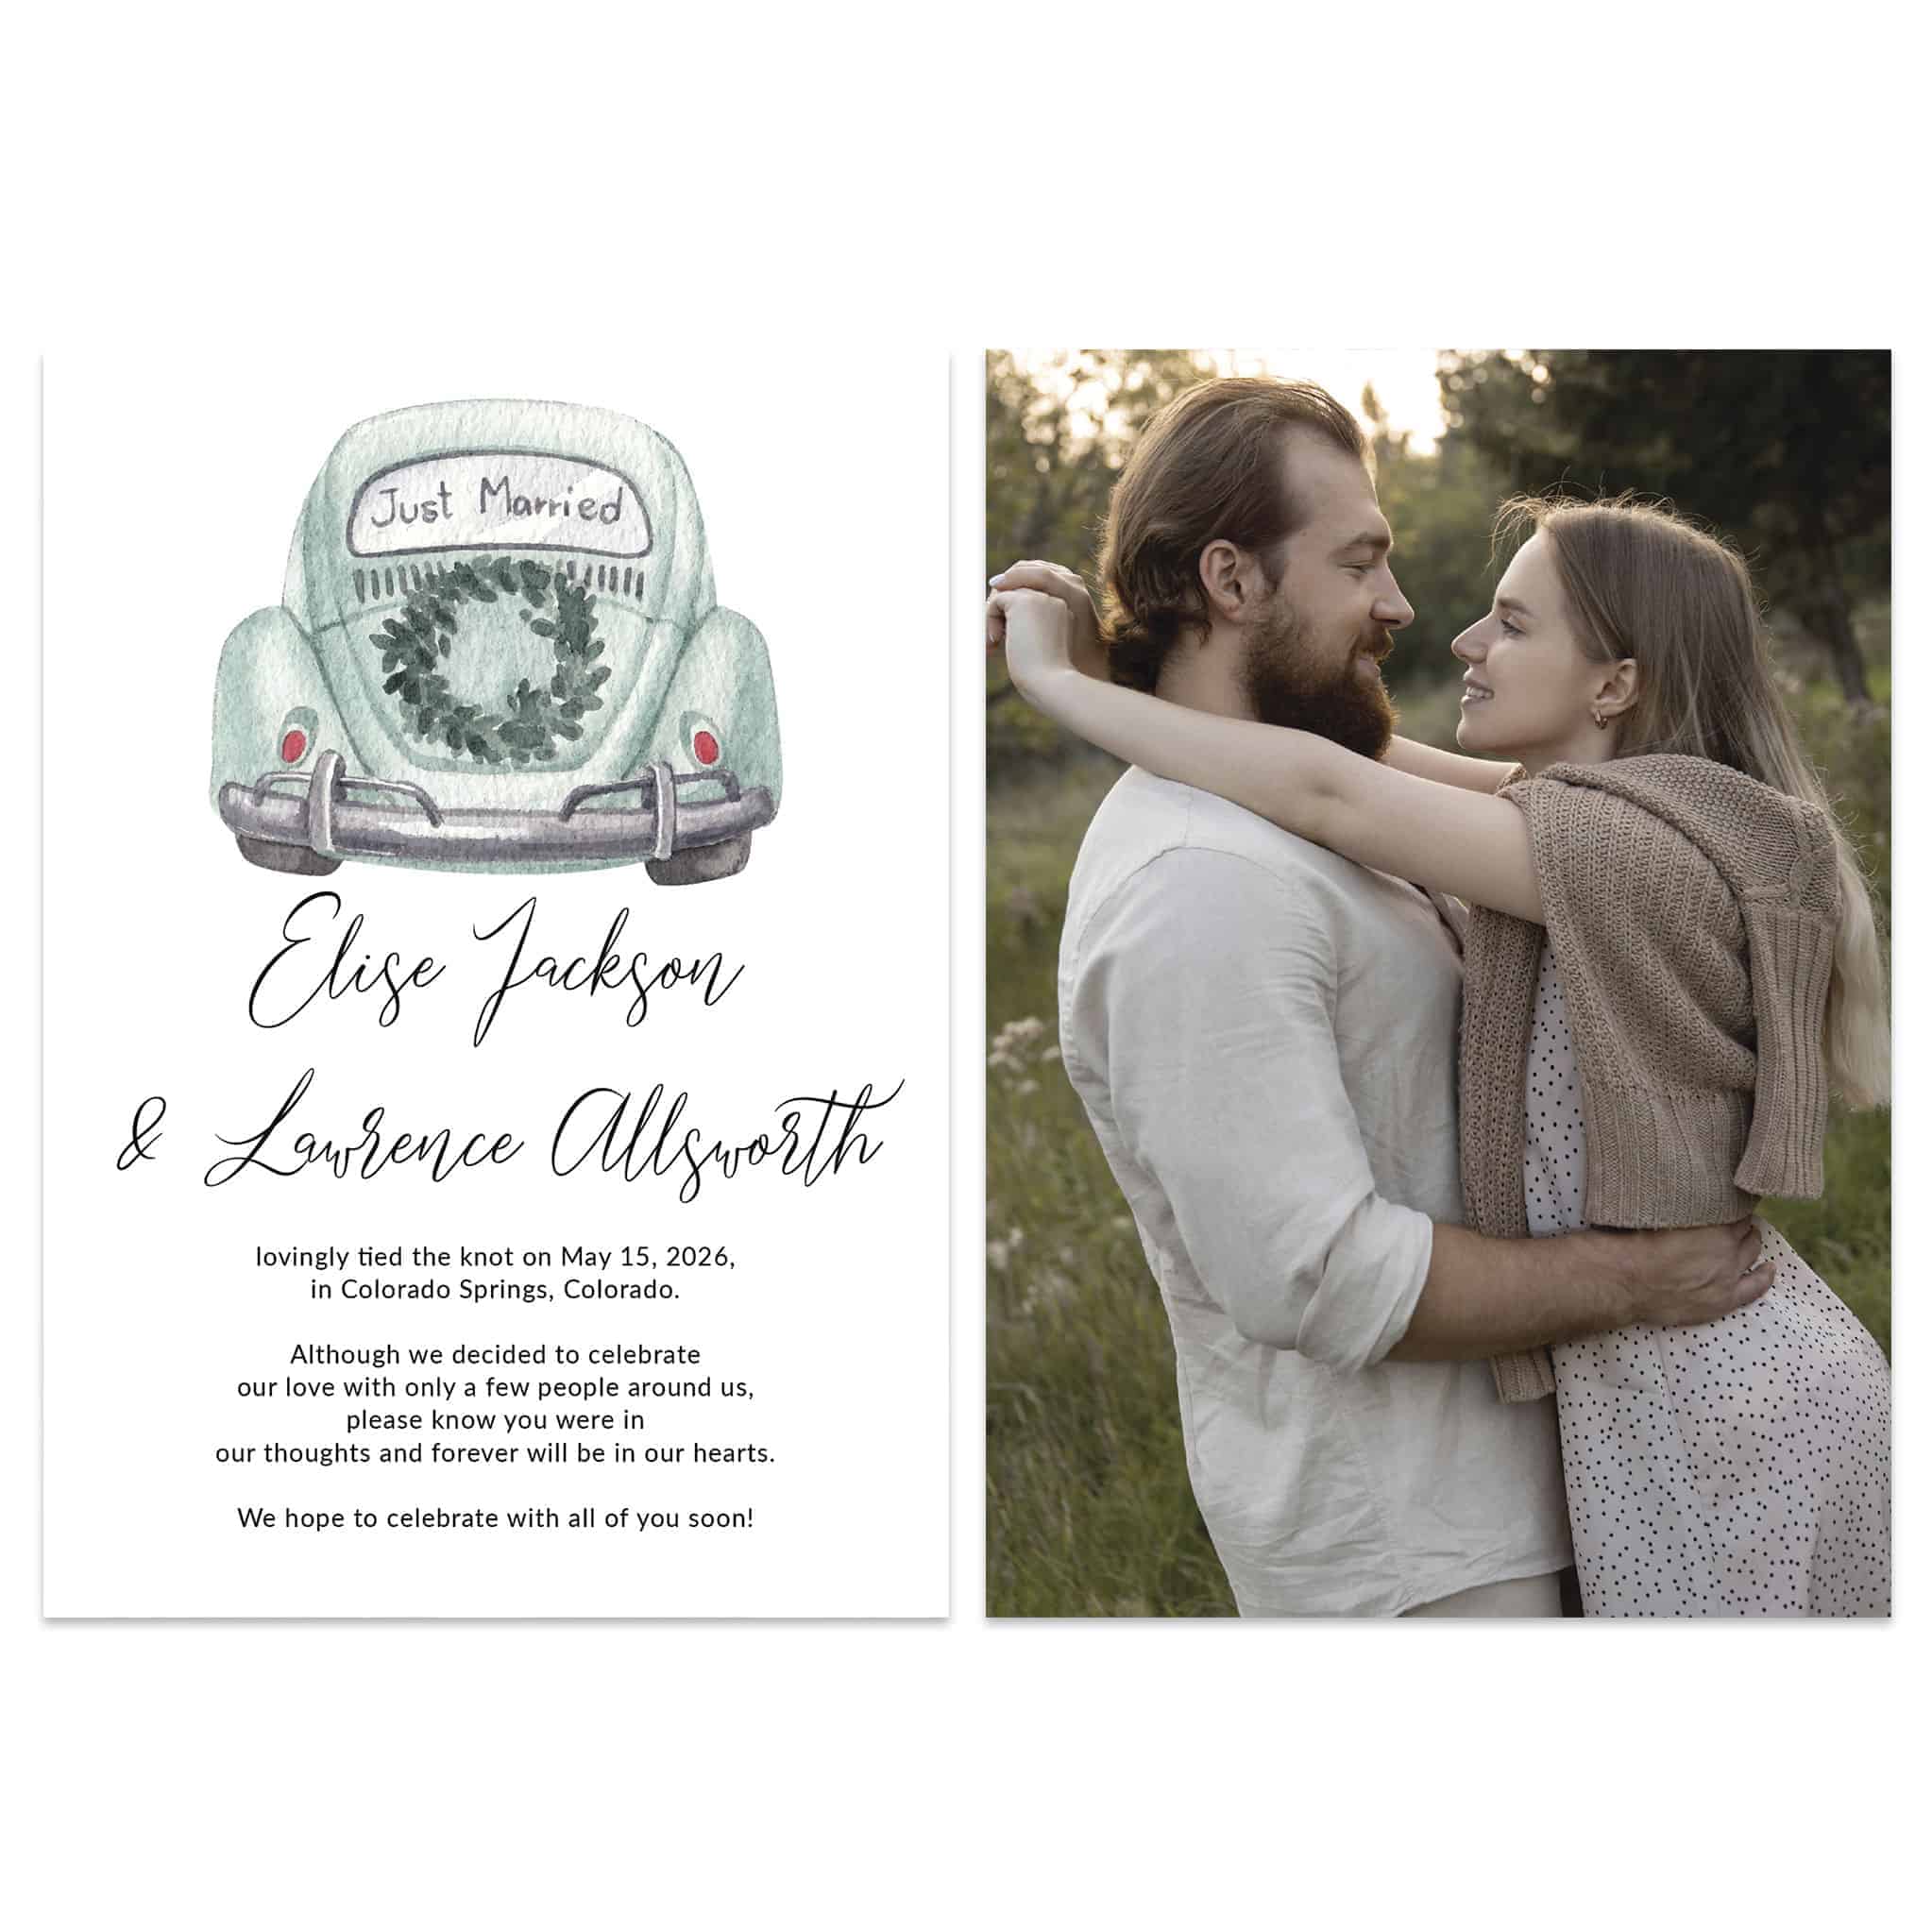 Just Married Elopement Wedding Announcement Cards, Watercolor Car, Add your photo